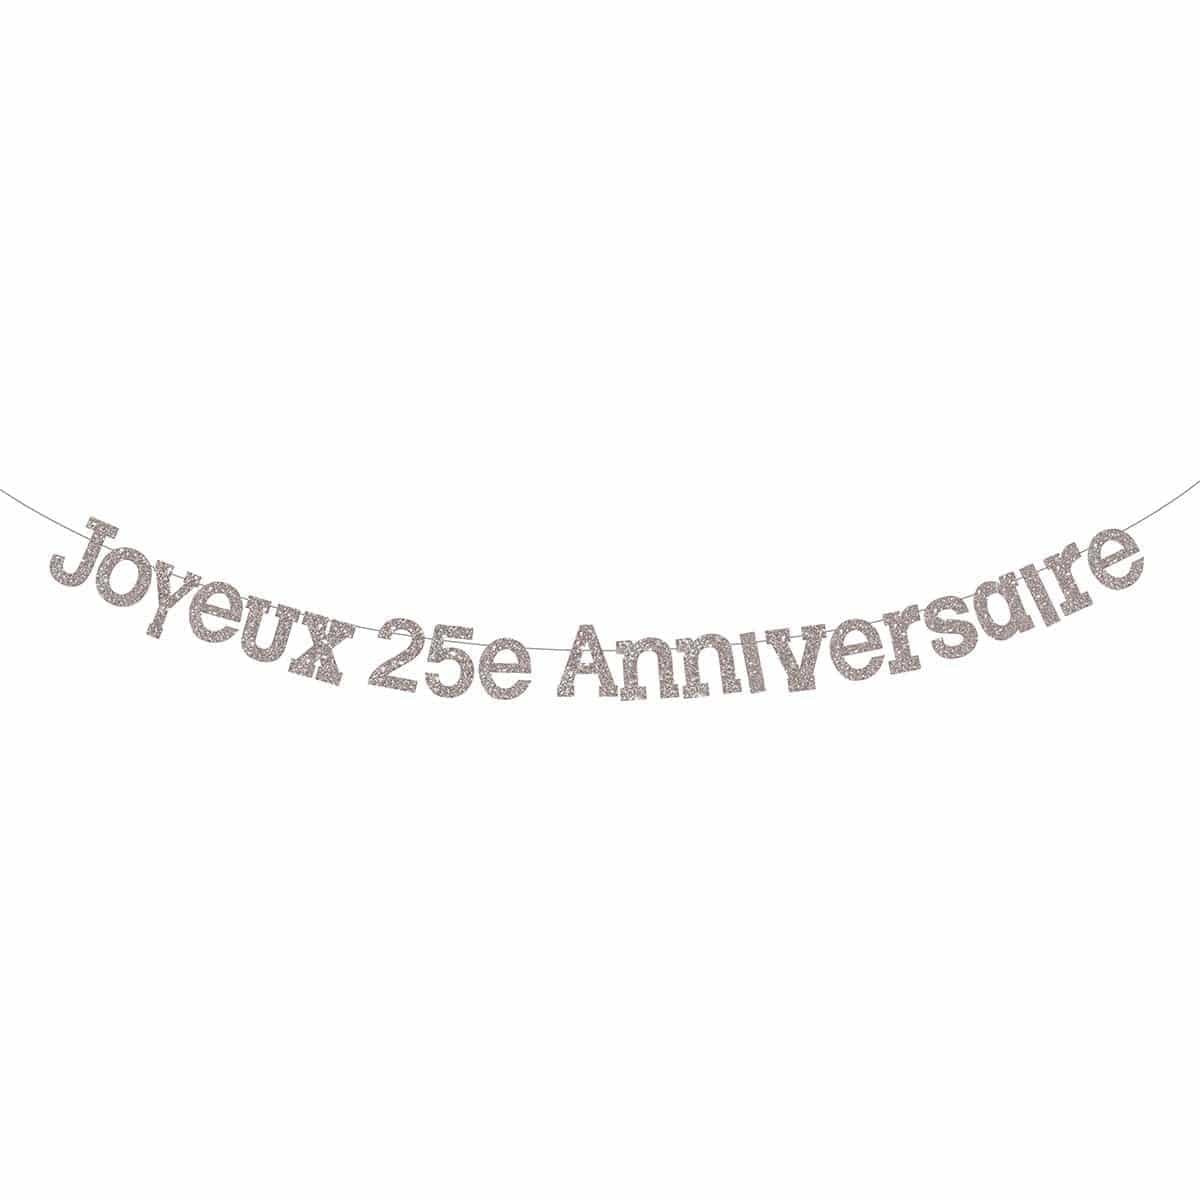 http://www.party-expert.com/cdn/shop/products/skd-party-by-forum-wedding-anniversary-joyeux-anniversaire-25-silver-banner-749567964270-14193271144508.jpg?v=1655661417&width=1200